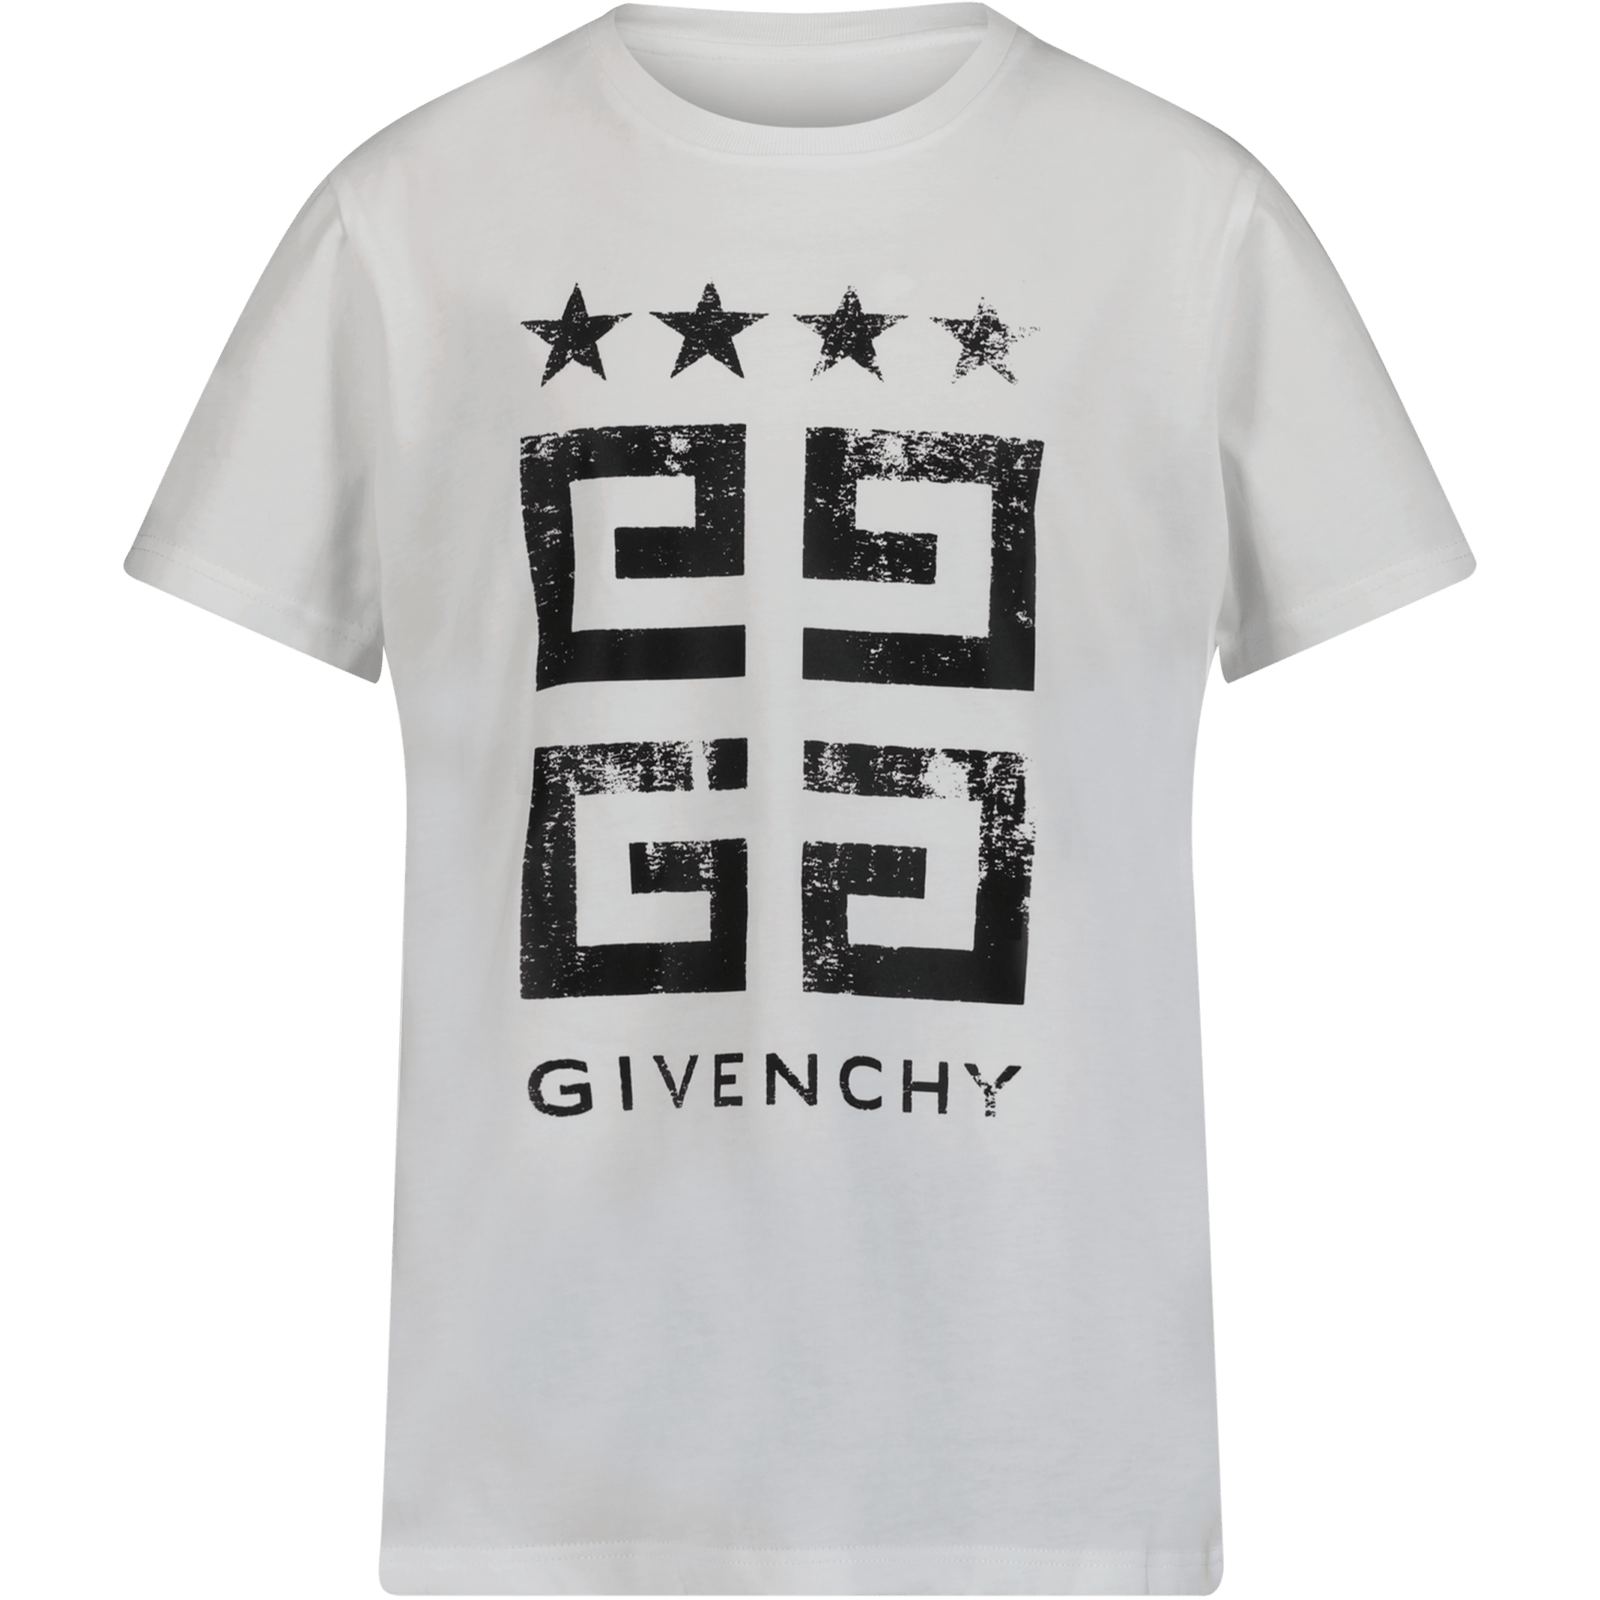 Givenchy Kinder Jongens T-Shirt Wit 4Y